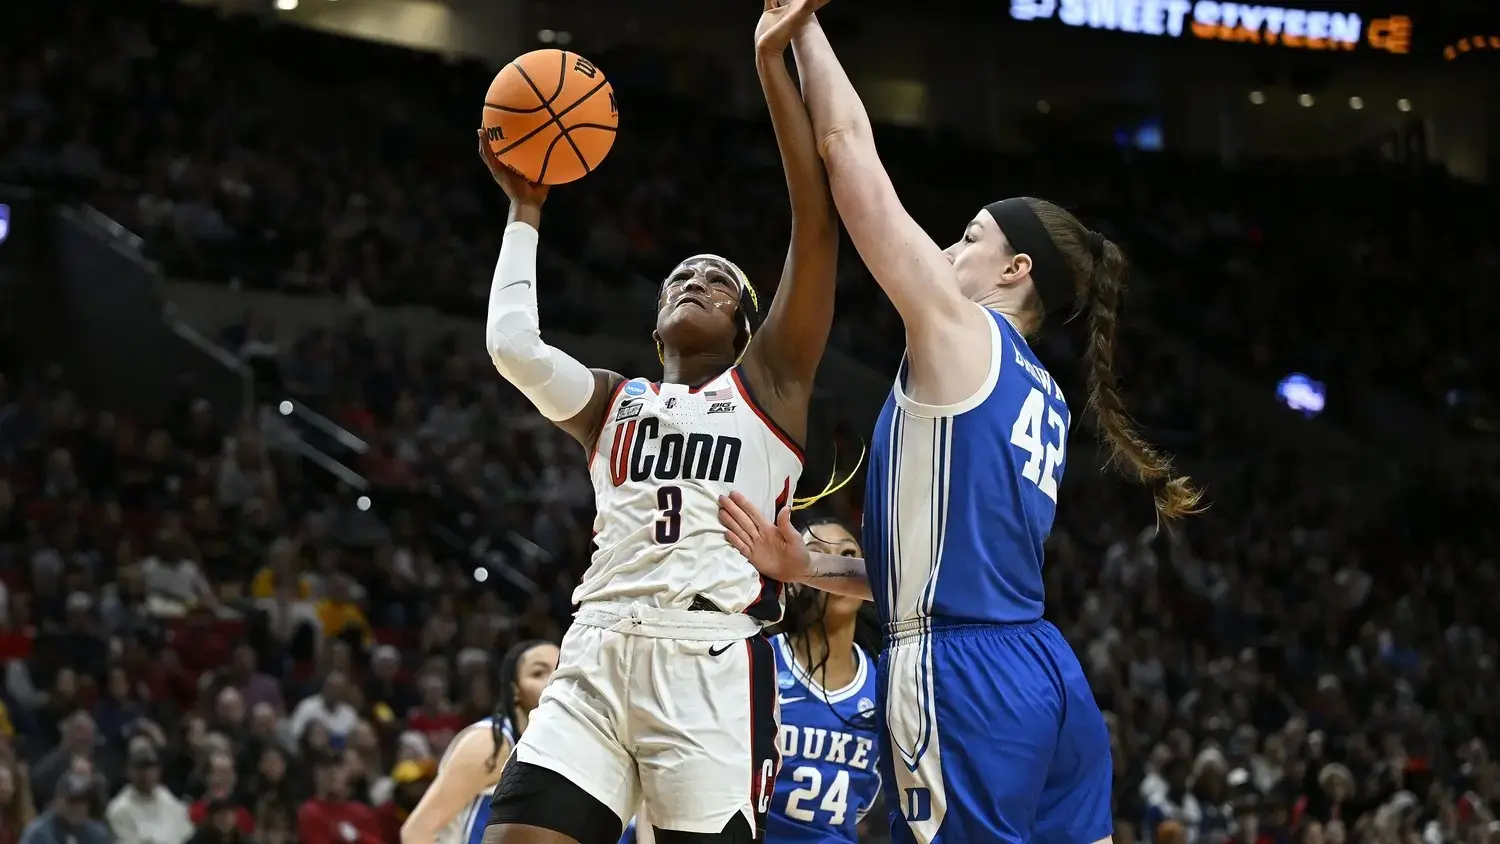 Mar 30, 2024; Portland, OR, USA; UConn Huskies forward Aaliyah Edwards (3) drives to the basket during the first half against Duke Blue Devils center Kennedy Brown (42) in the semifinals of the Portland Regional of the 2024 NCAA Tournament at the Moda Center. / Troy Wayrynen-USA TODAY Sports